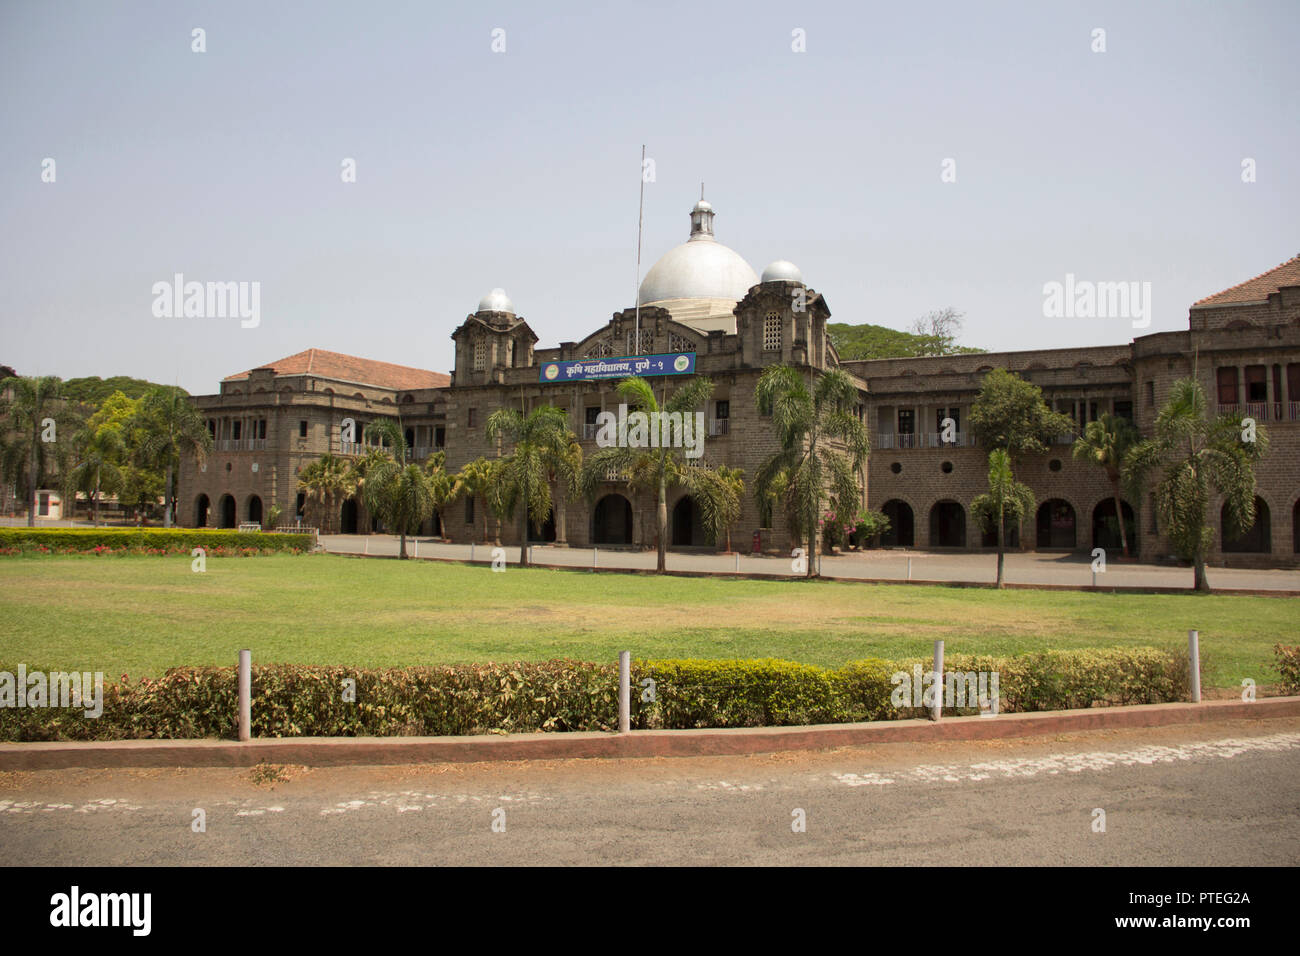 A view of Mahatma Phule Agriculture College Pune, India Stock Photo